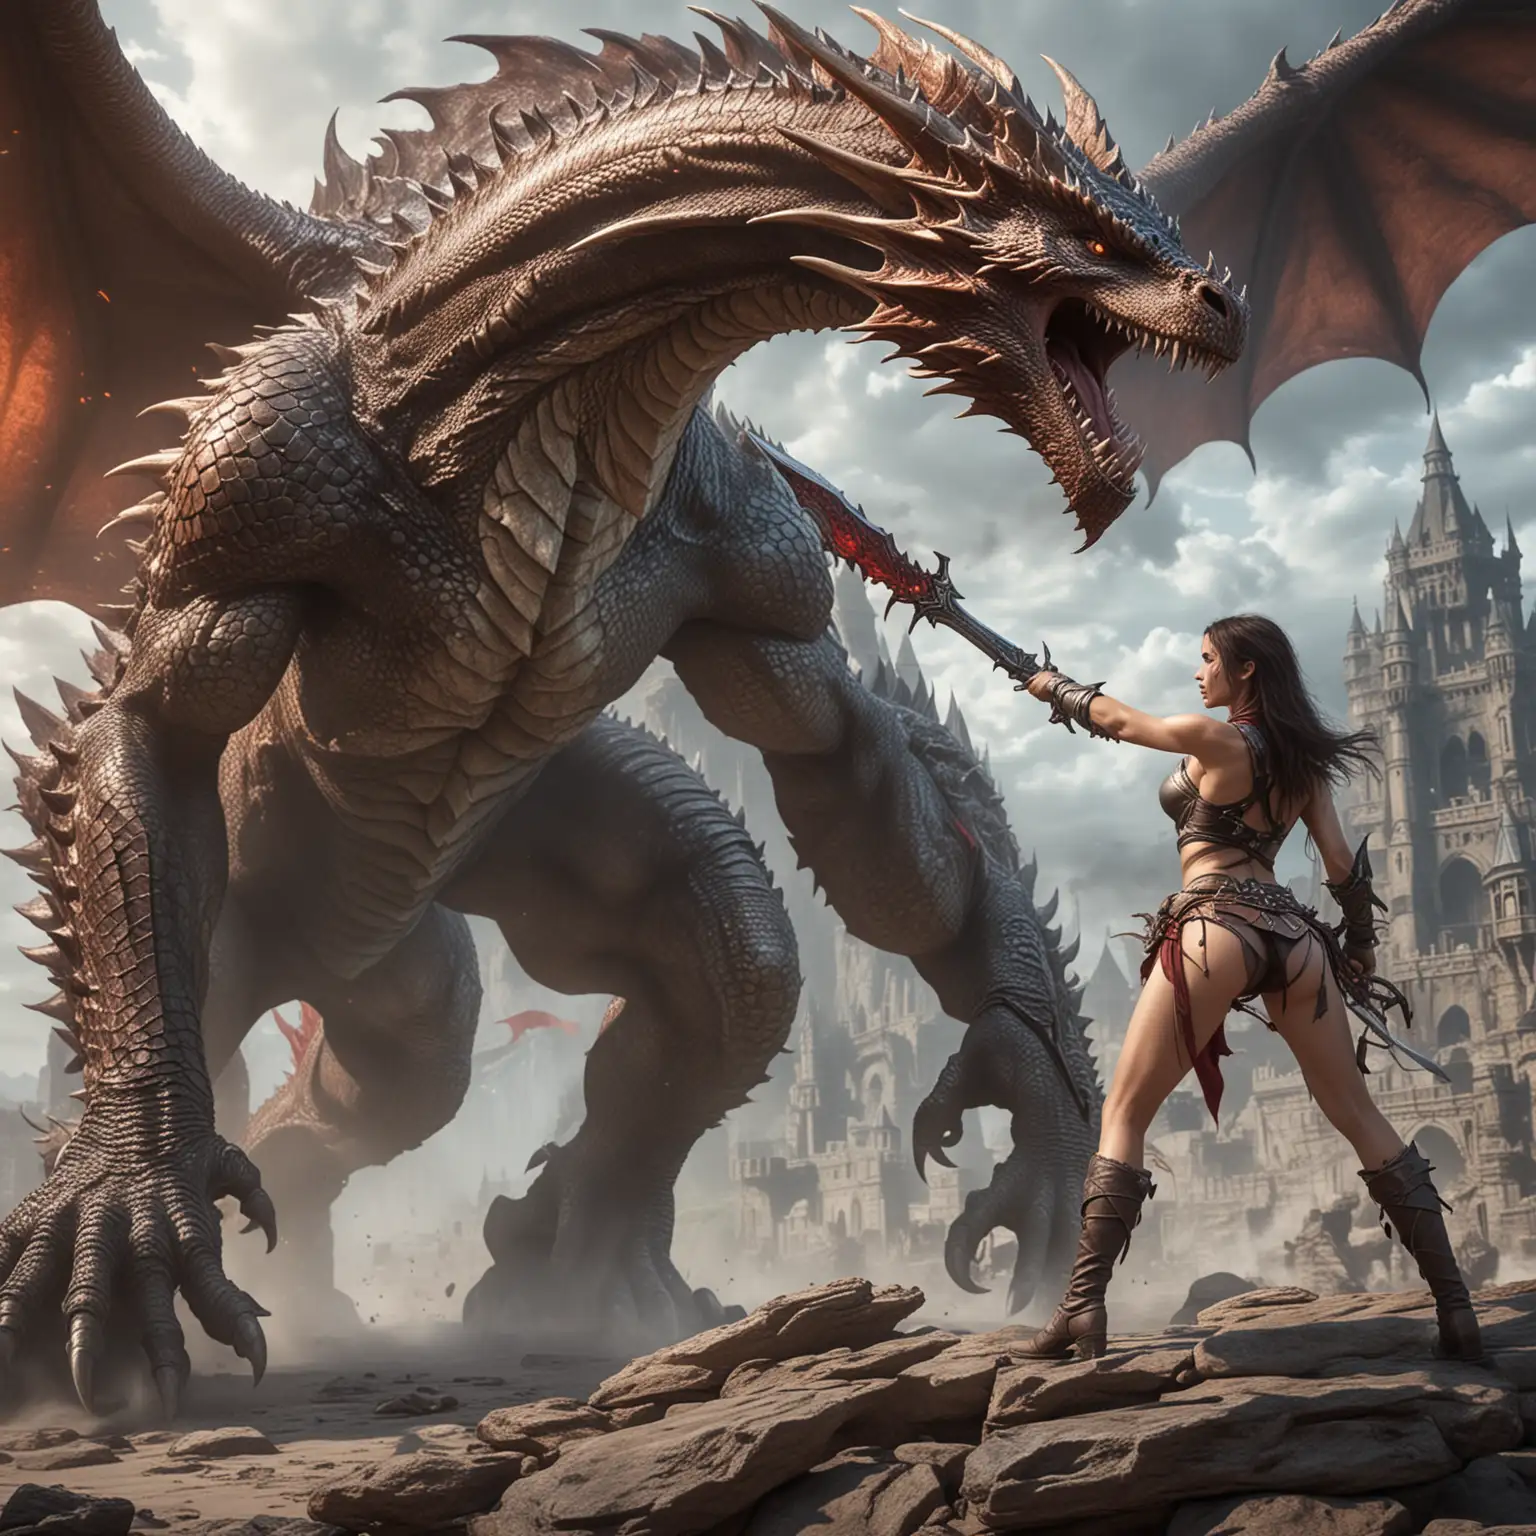 fantasy image of a female dragon slayer in skimpy clothes facing and fighting a giant dragon
